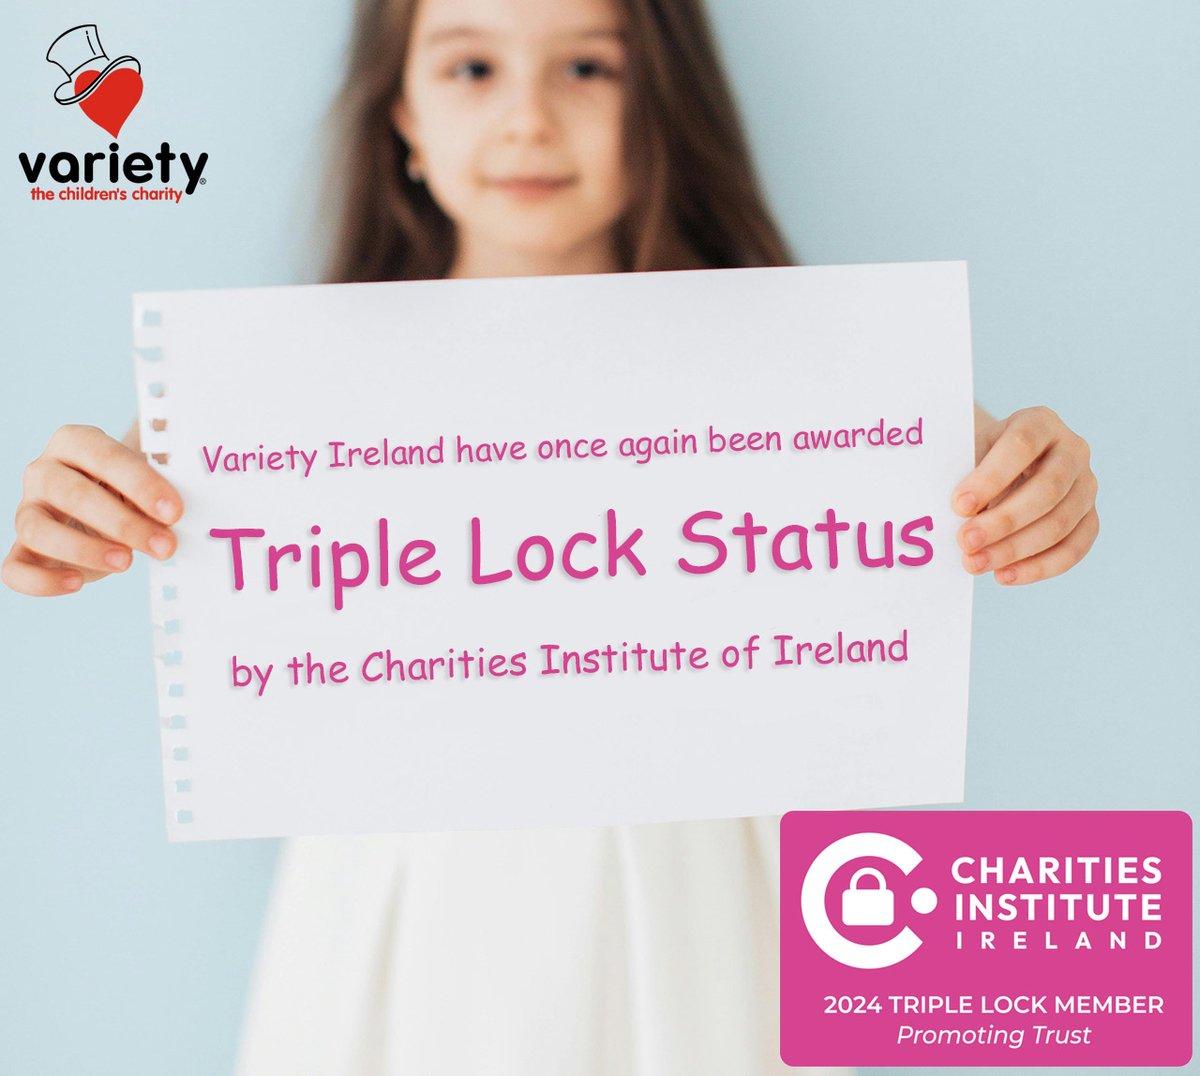 Variety Ireland is proud to have once again been awarded Triple Lock status by @CiiTweets for 2024.🥰👏
Triple Lock status is awarded to charities that uphold the highest standards in transparent reporting, ethical fundraising & governance structures.
#cii #TripleLock #governance